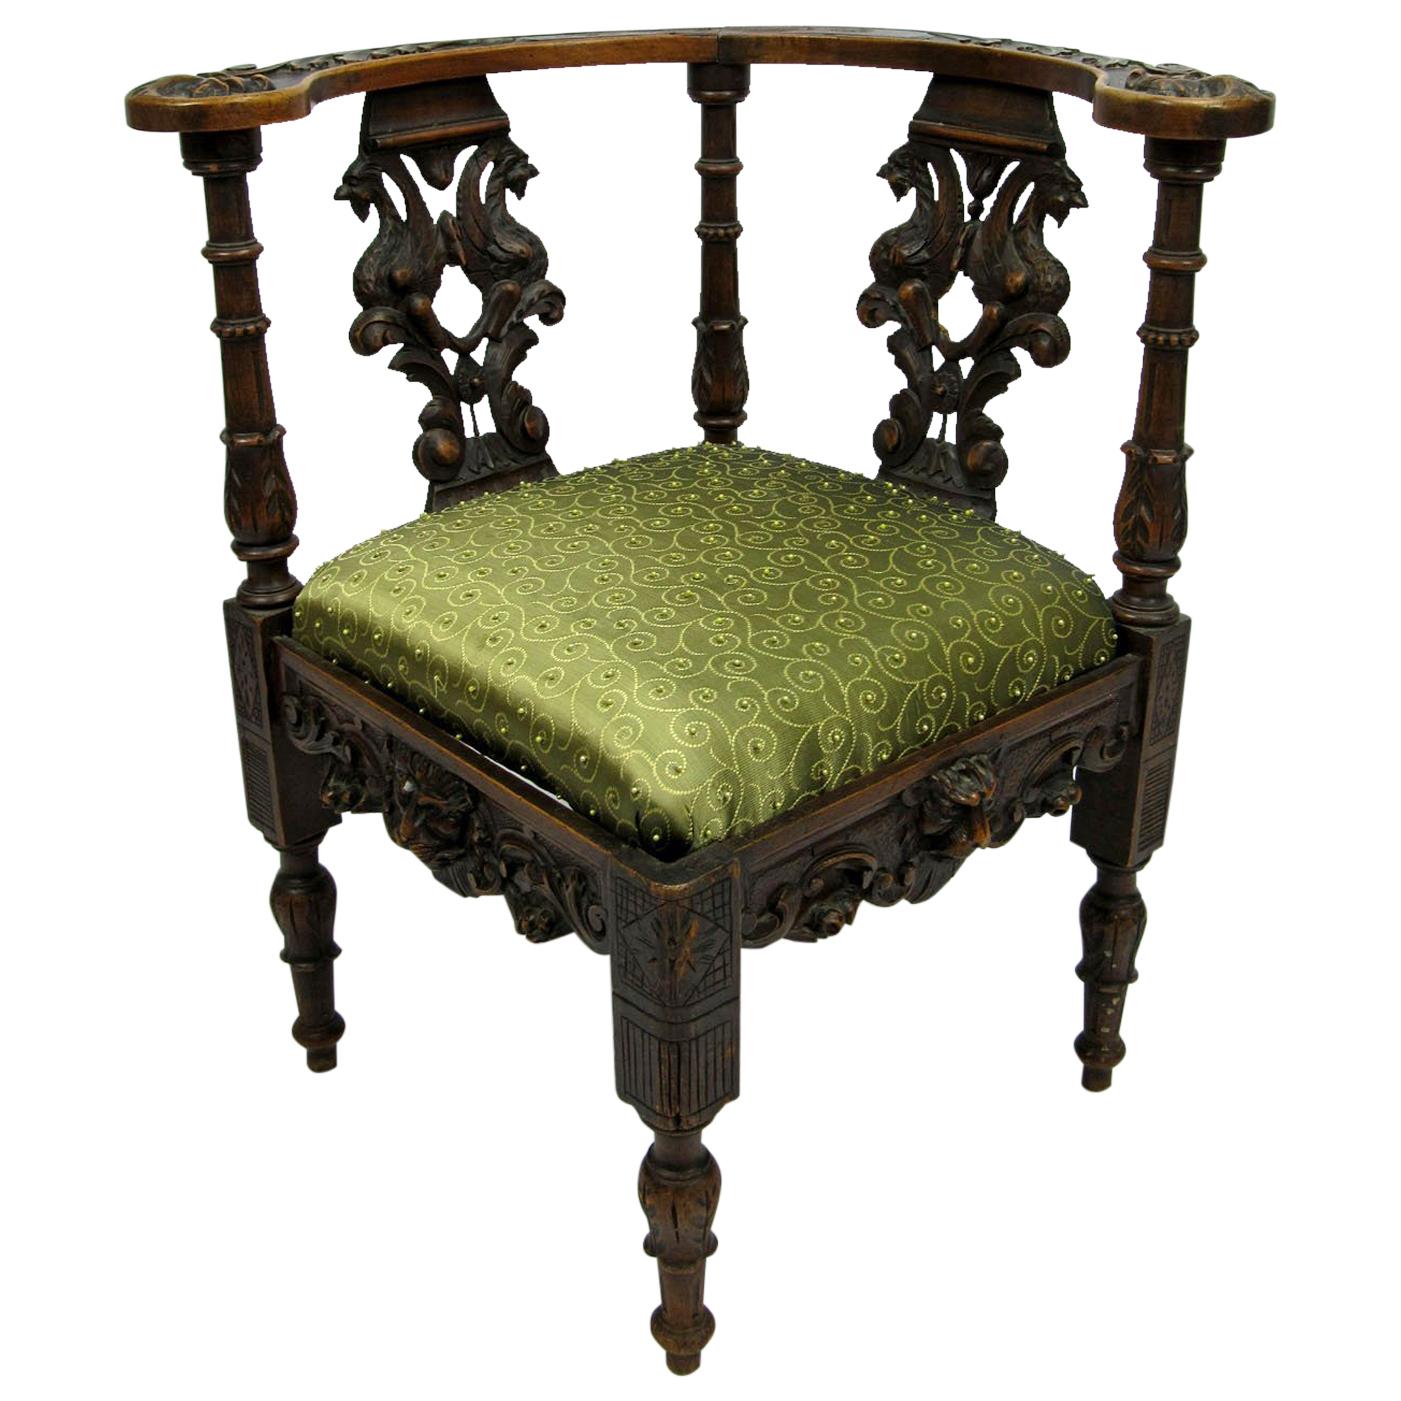 Late 18th or Early 19th Century Italian Desk Chair For Sale